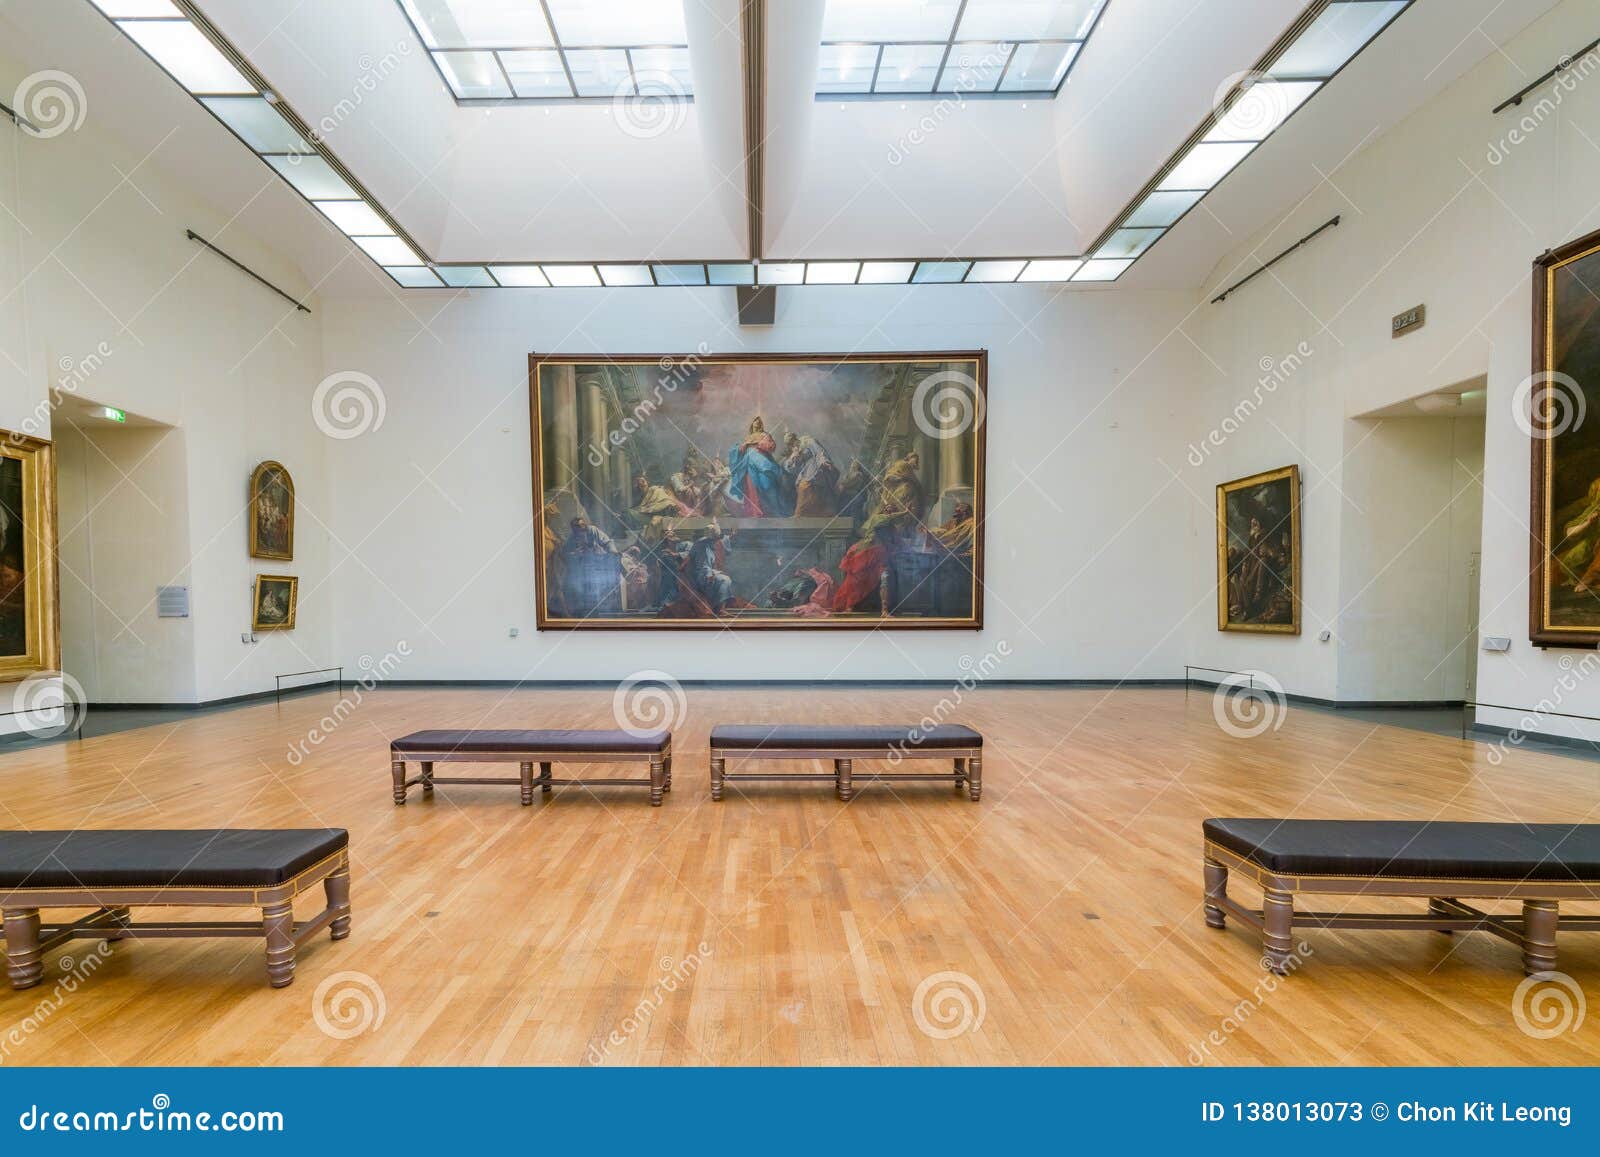 Drawing And Painting Exhibition Of The Famous Louvre Museum At